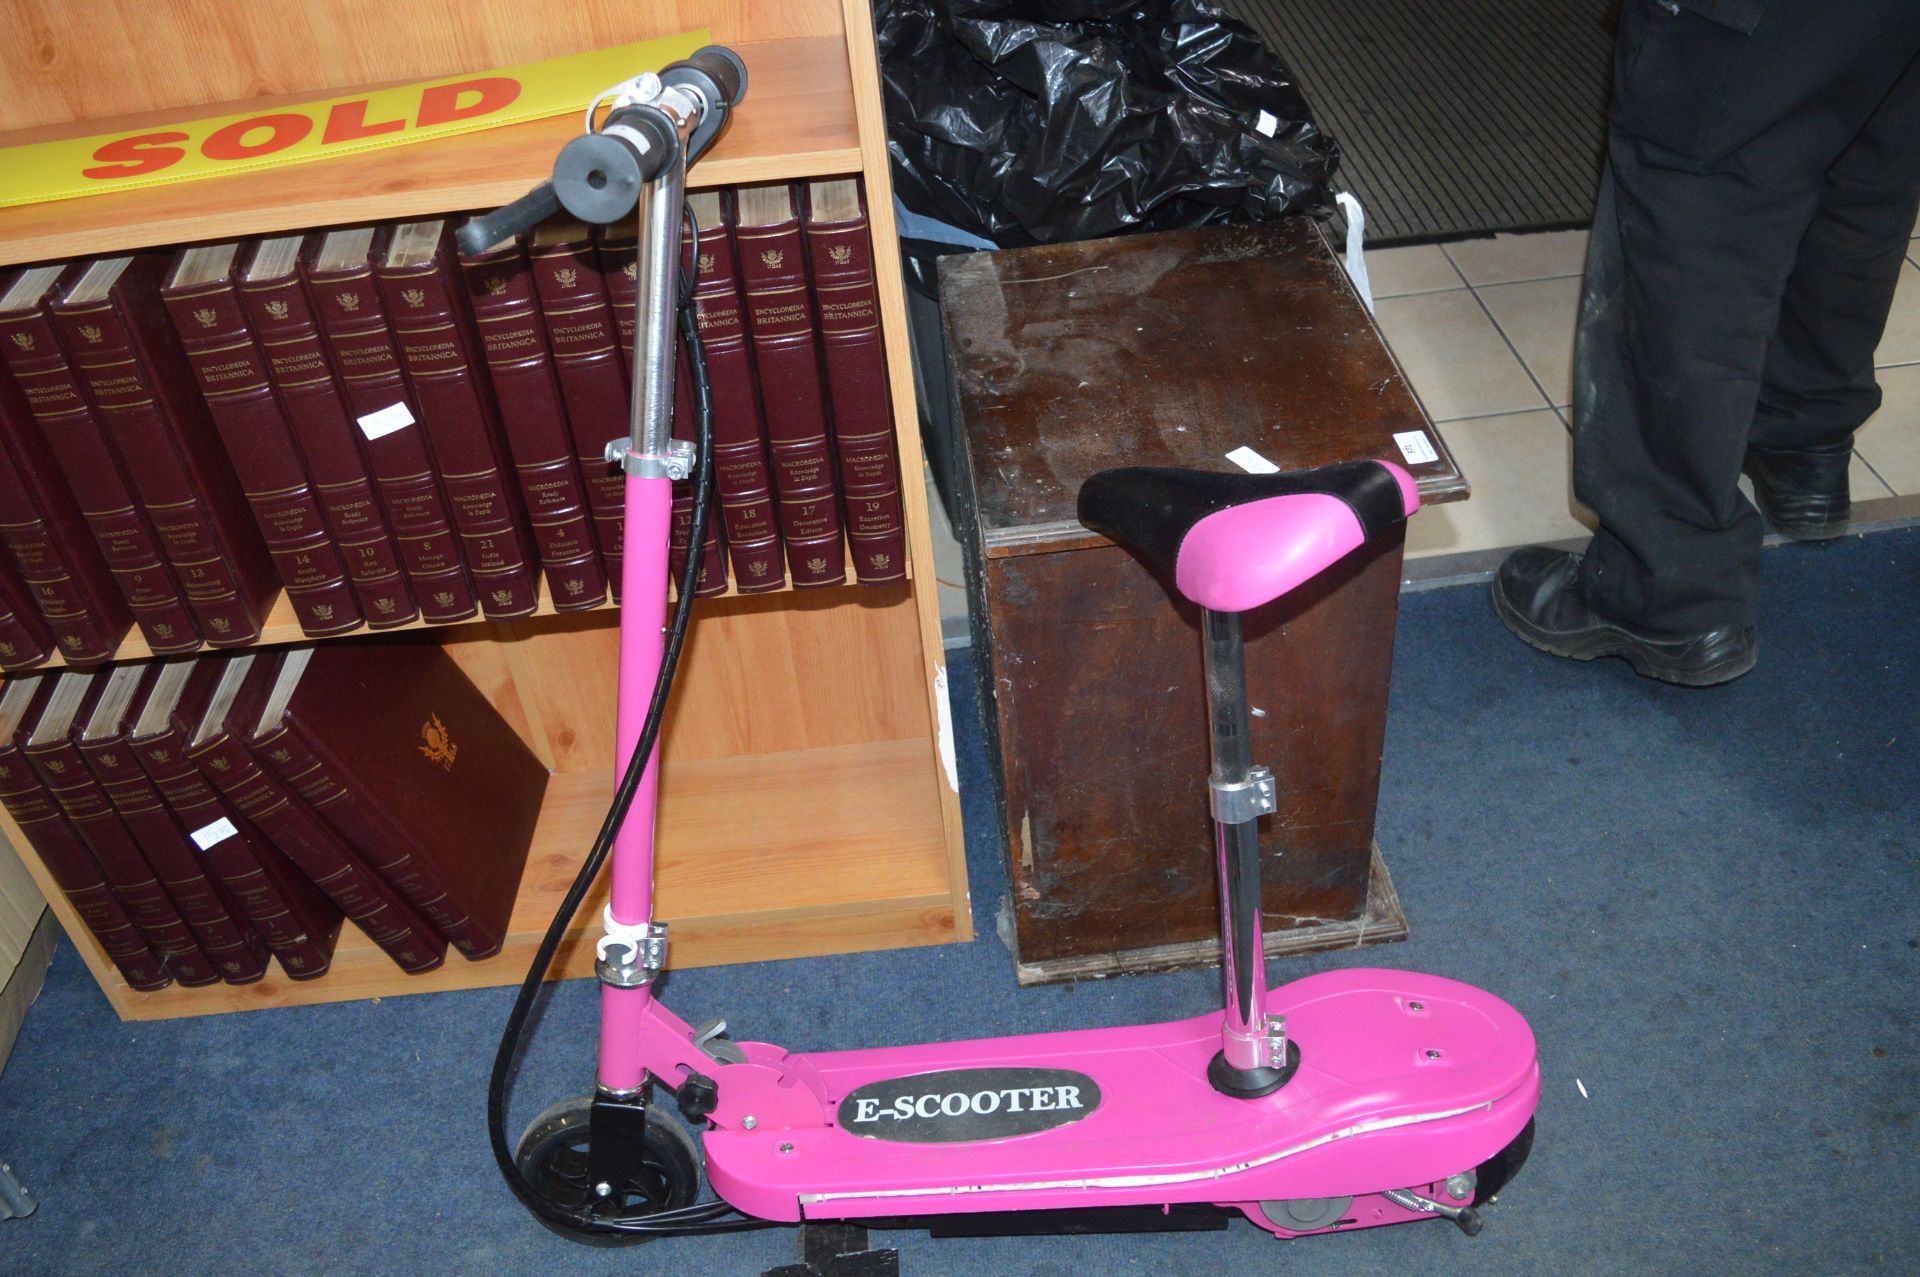 E-Scooter (pink)